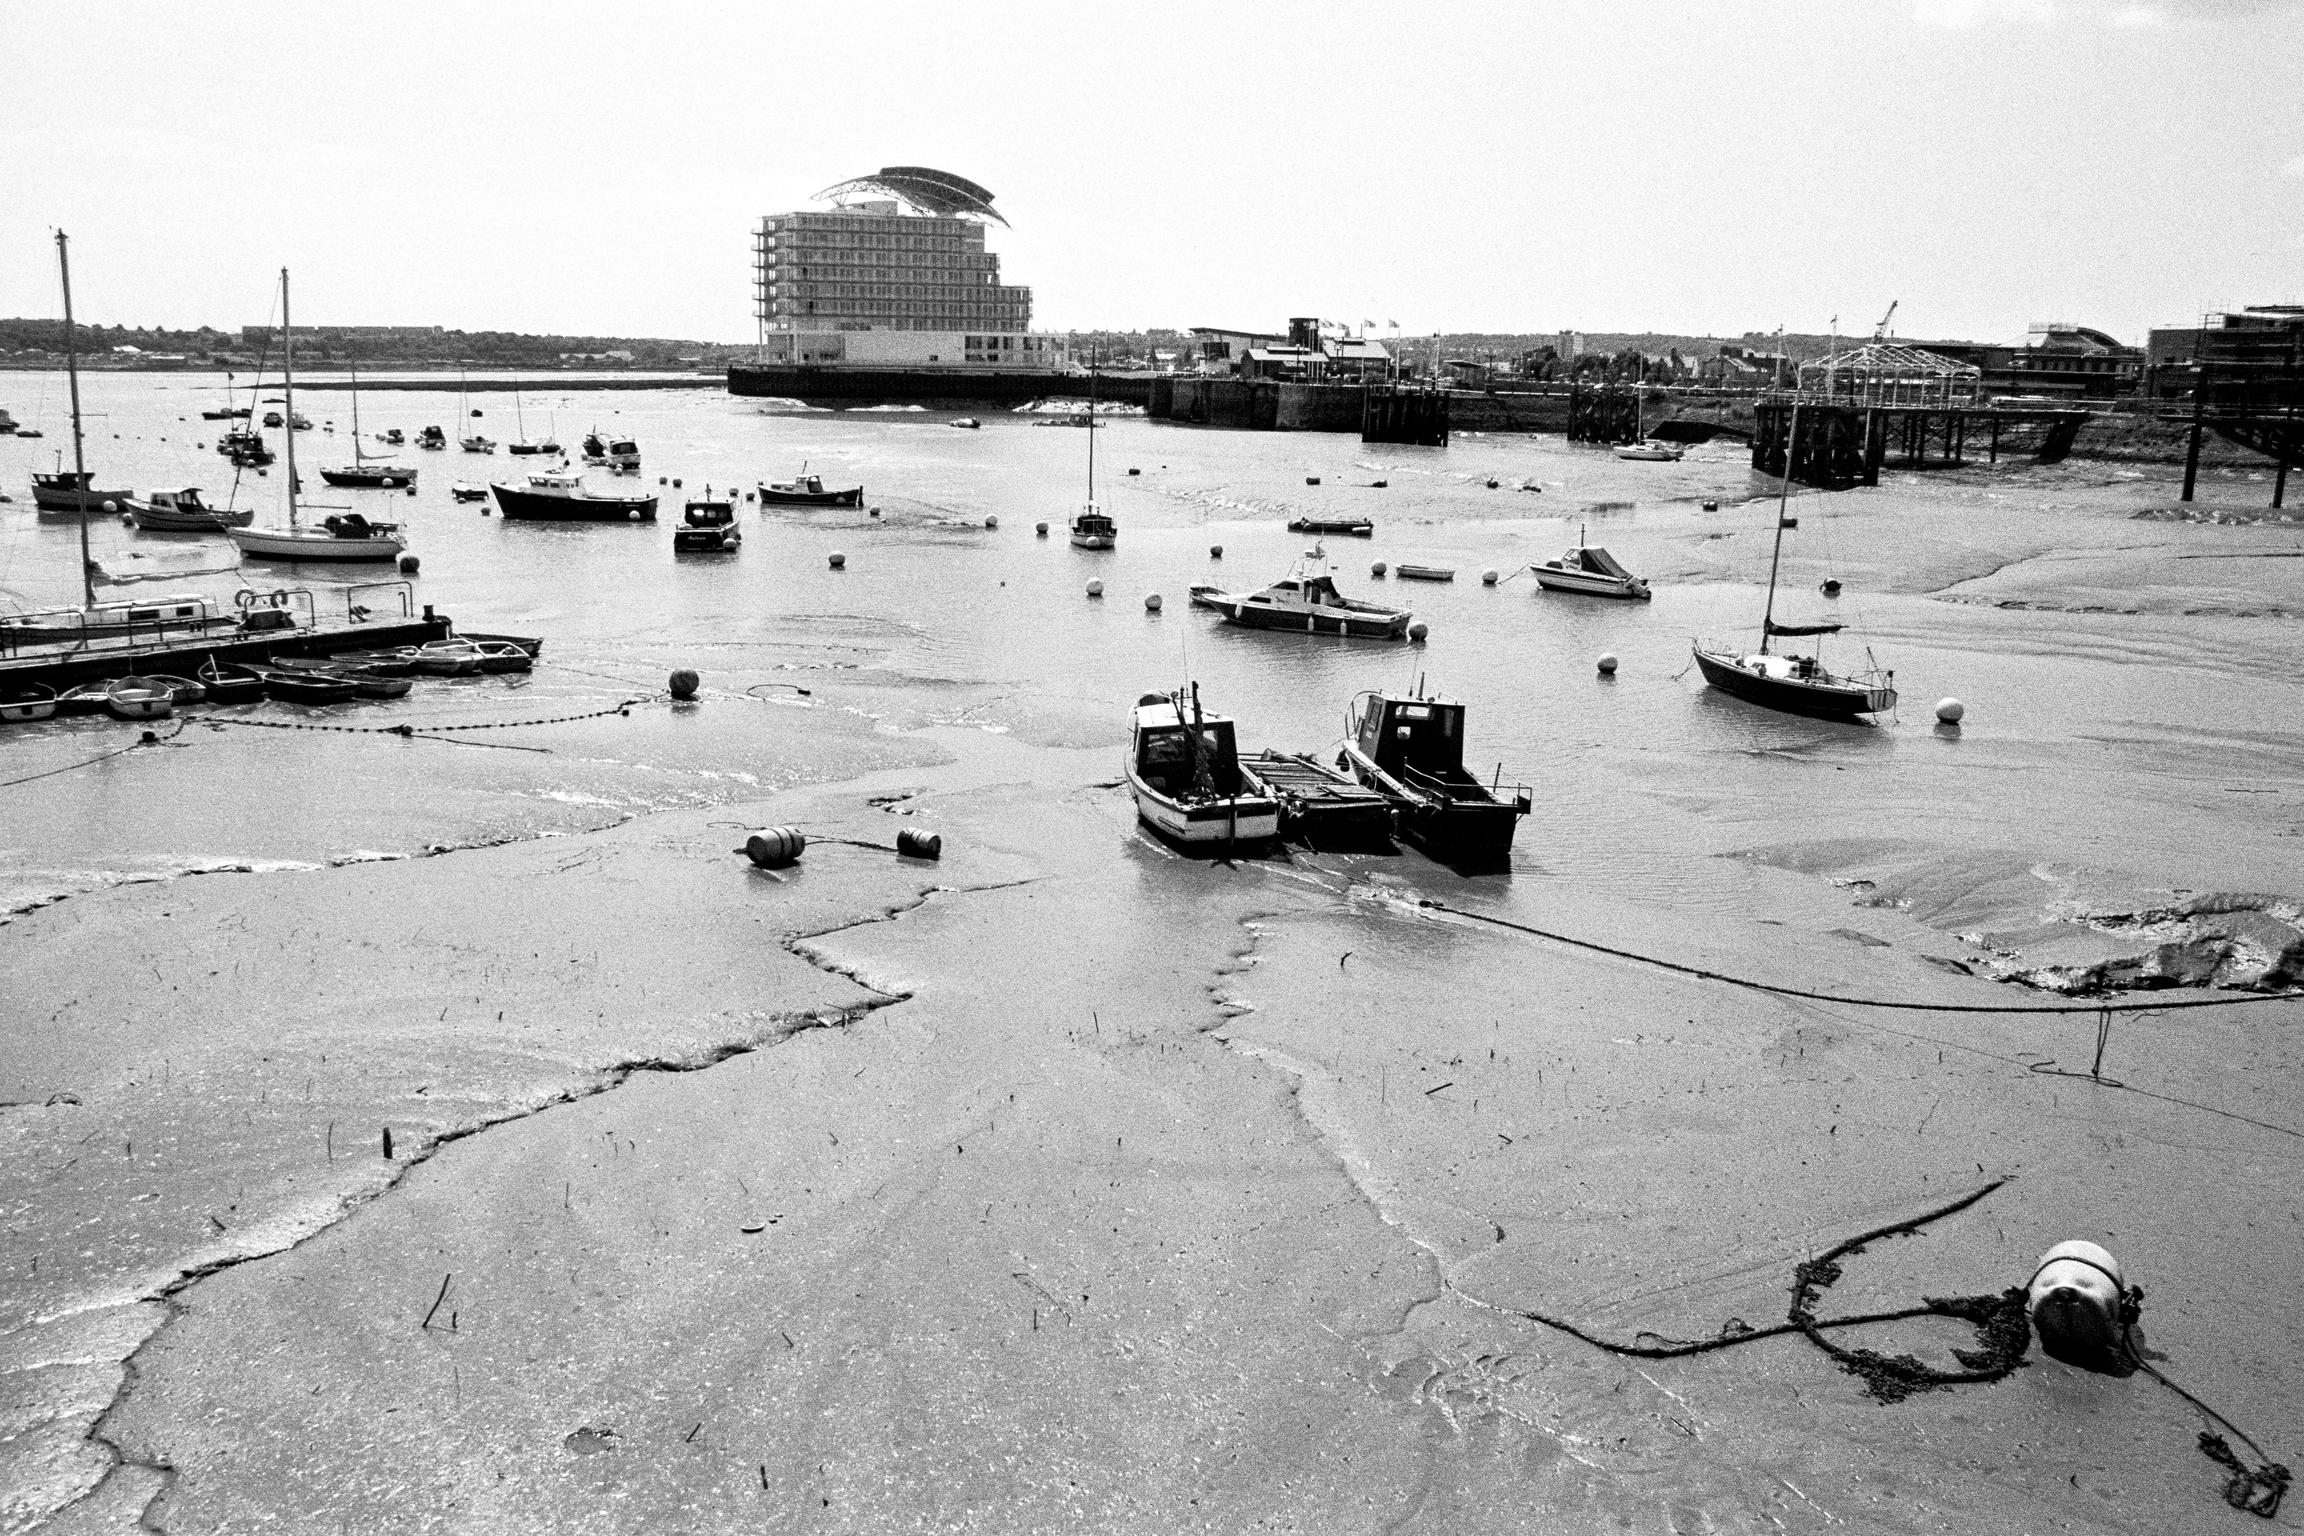 Golden patina on the polluted mud flats of the Bay before the Barrage construction. Cardiff, Wales